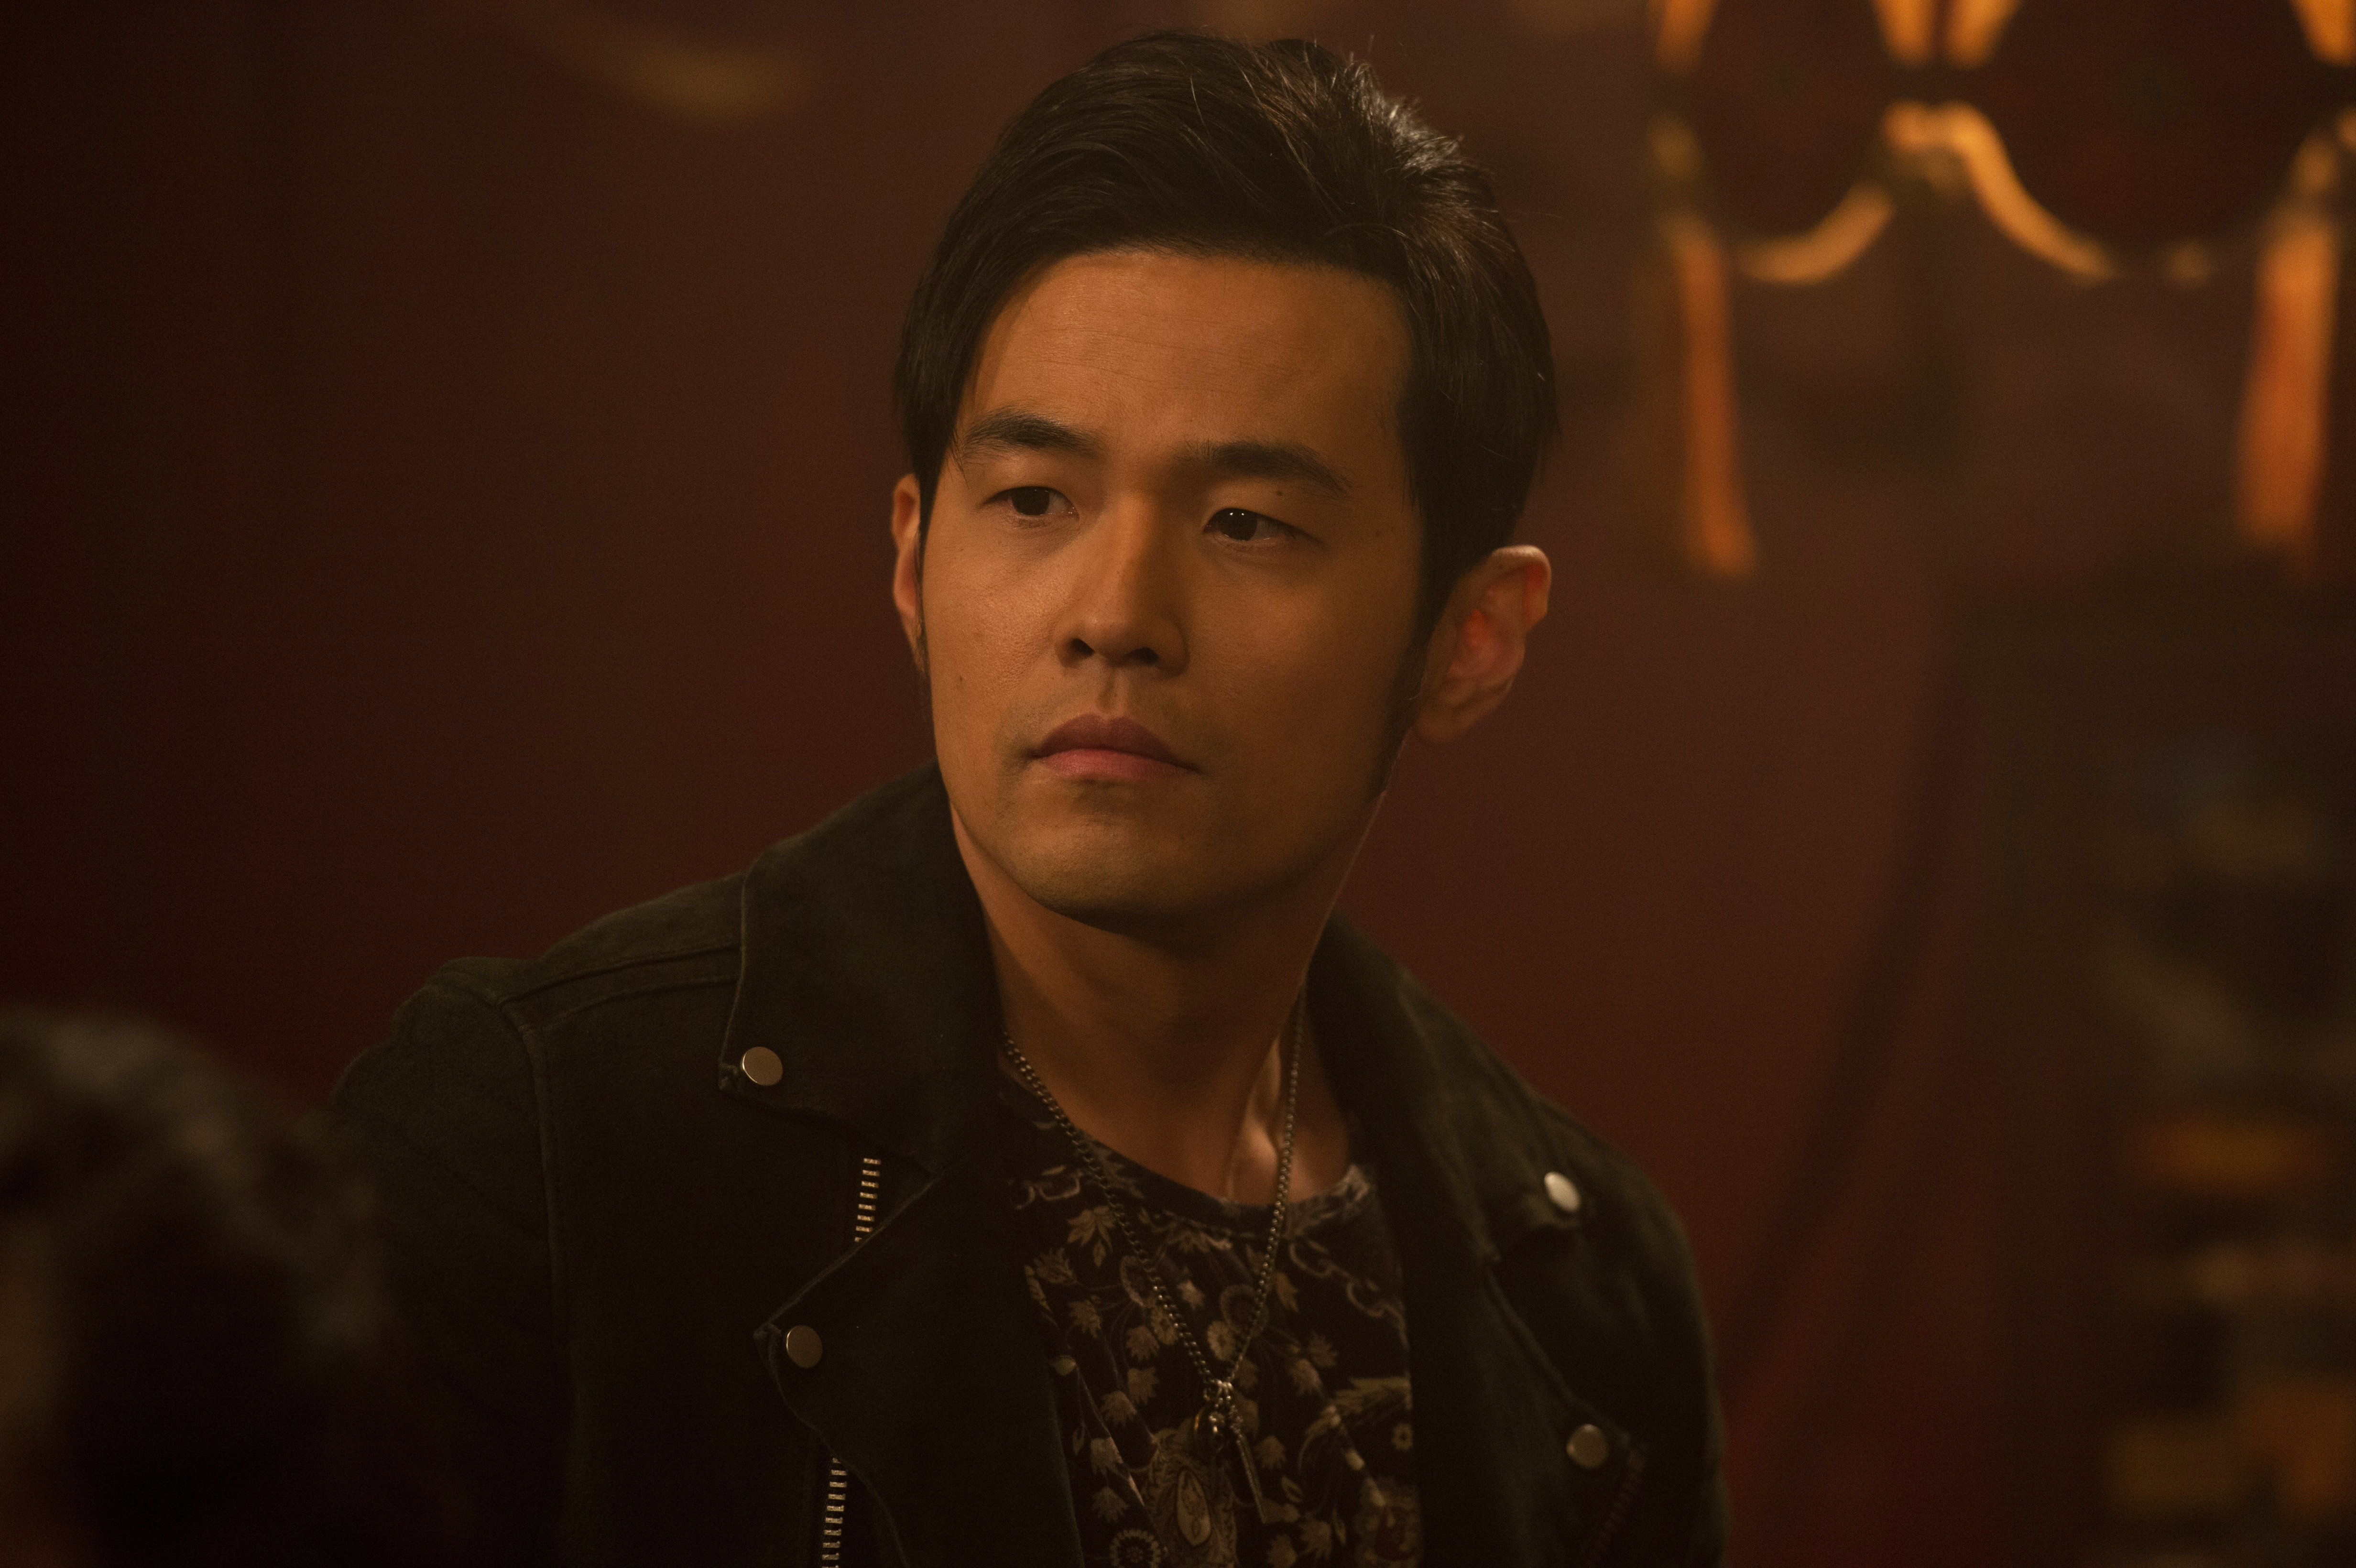 Jay Chou Now You See Me 2 4928x3280